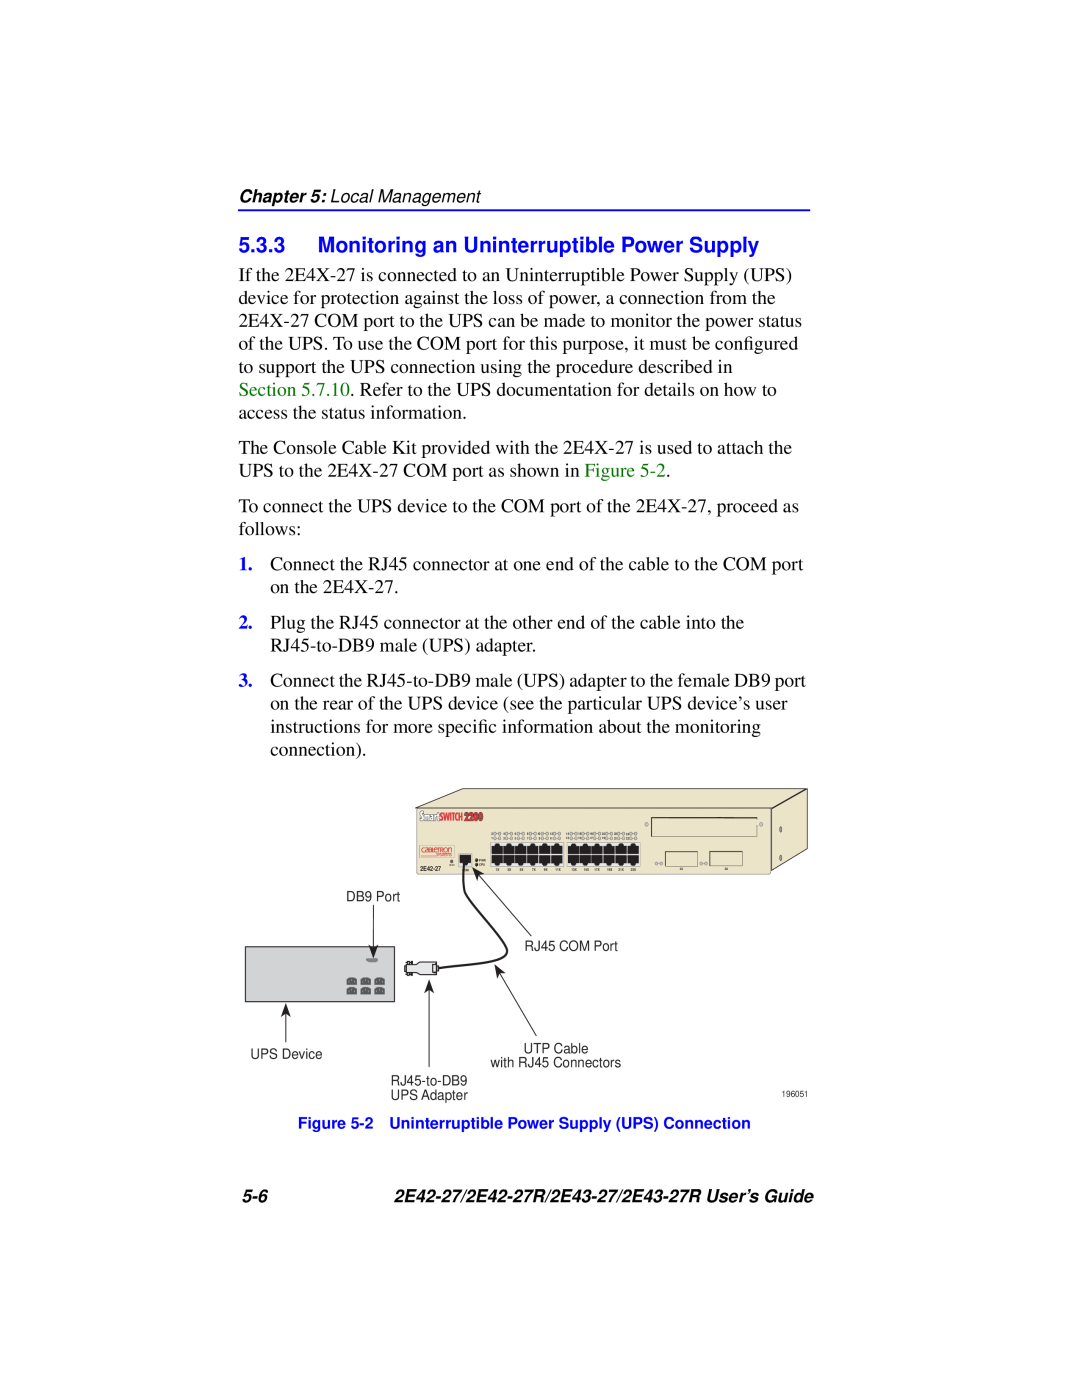 Cabletron Systems 2E43-27R manual Monitoring an Uninterruptible Power Supply, 2 Uninterruptible Power Supply UPS Connection 